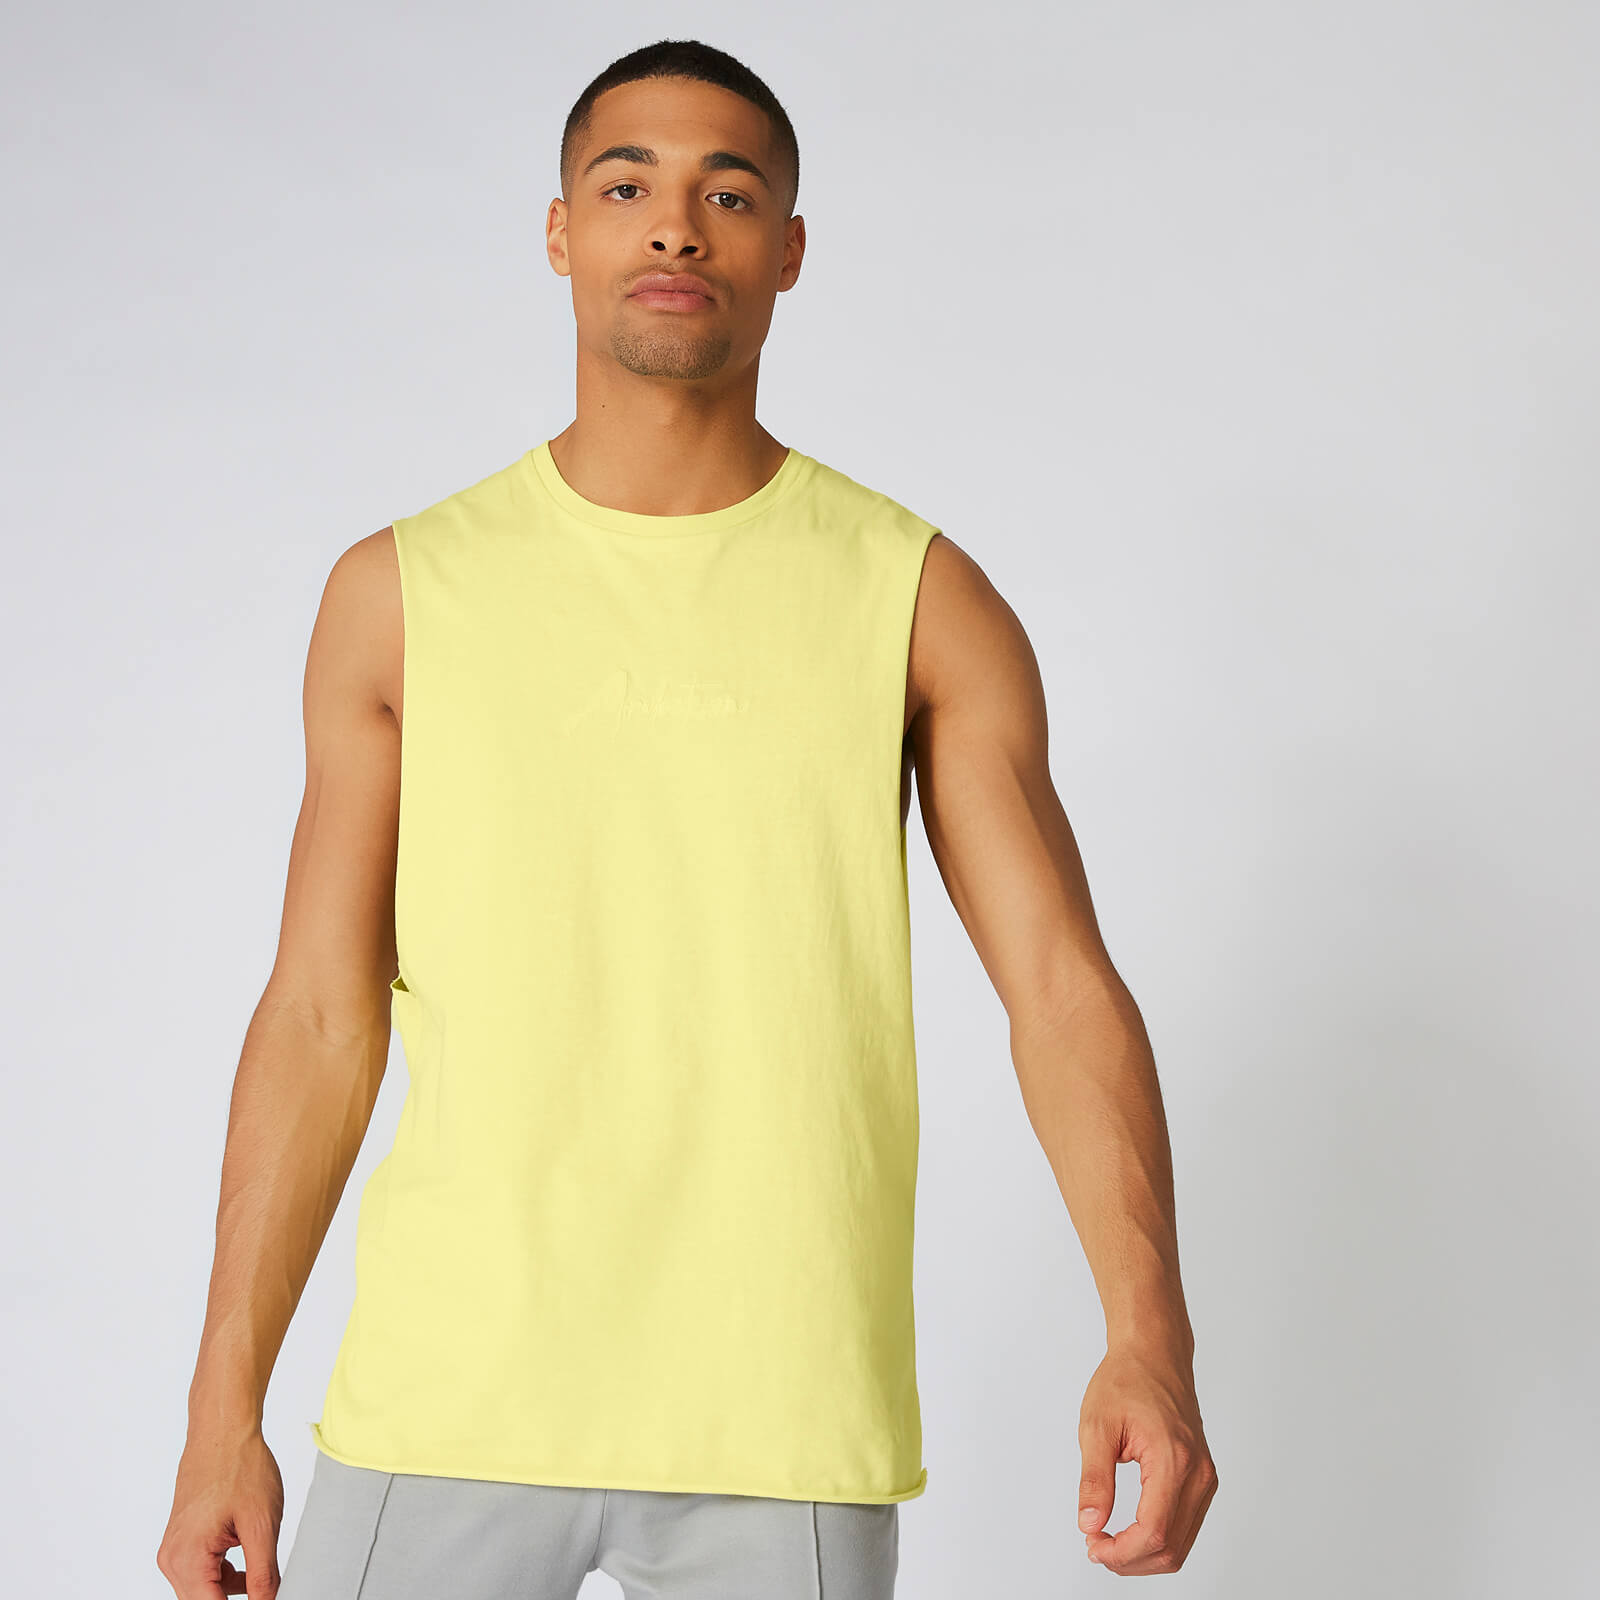 Myprotein Signature Tank Top - Limeade - XS